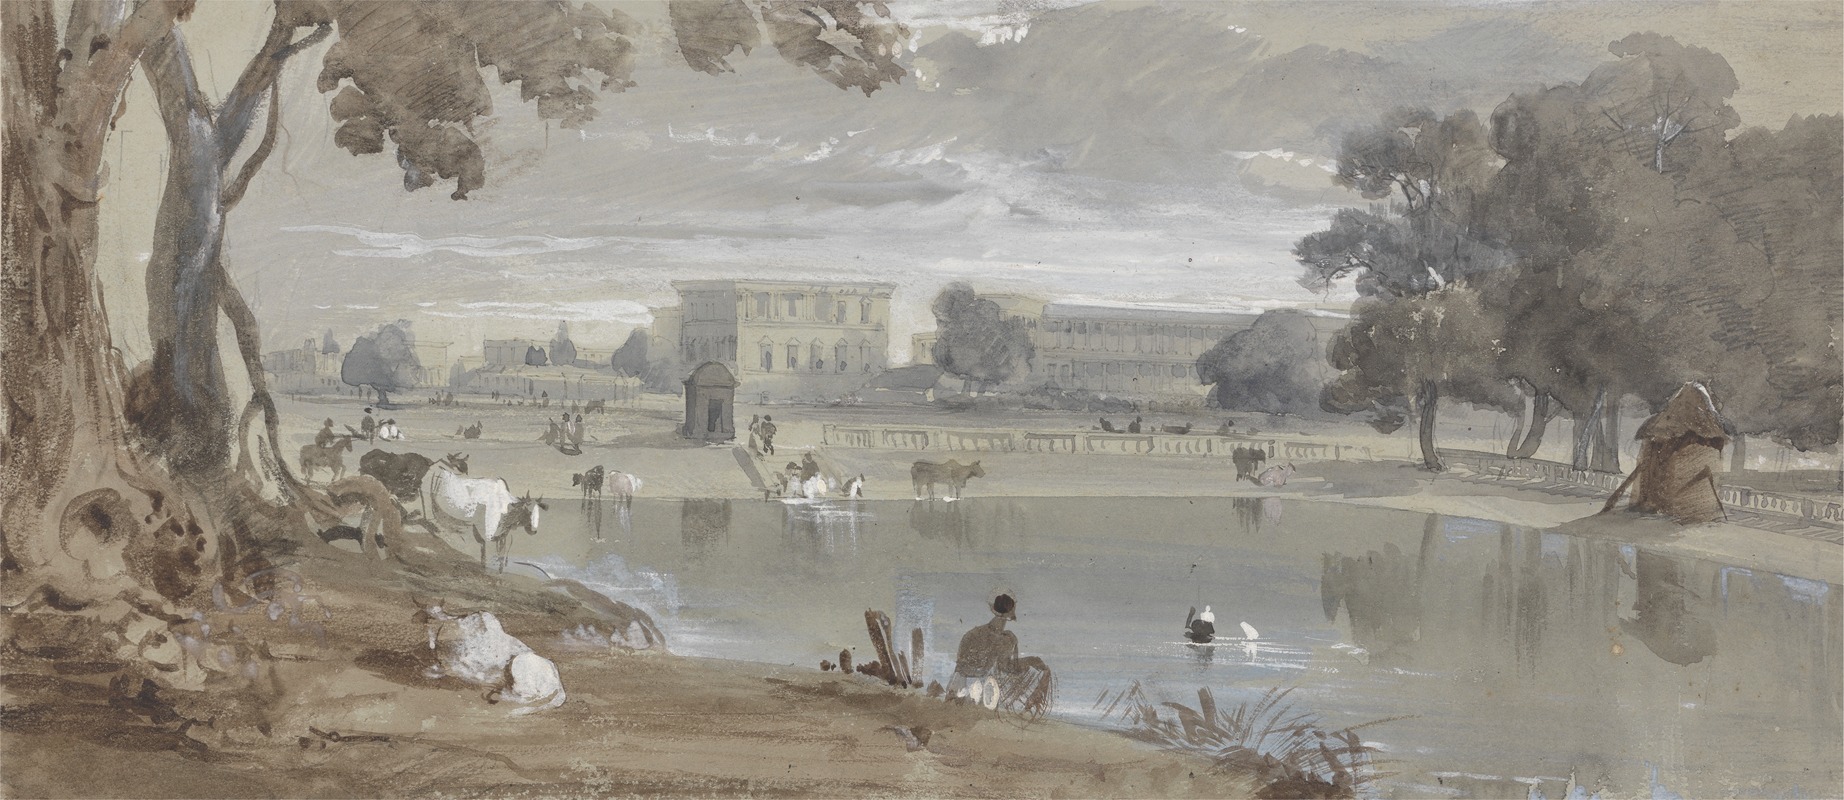 Sir Charles D'Oyly - View of Part of Chowringhee – Calcutta